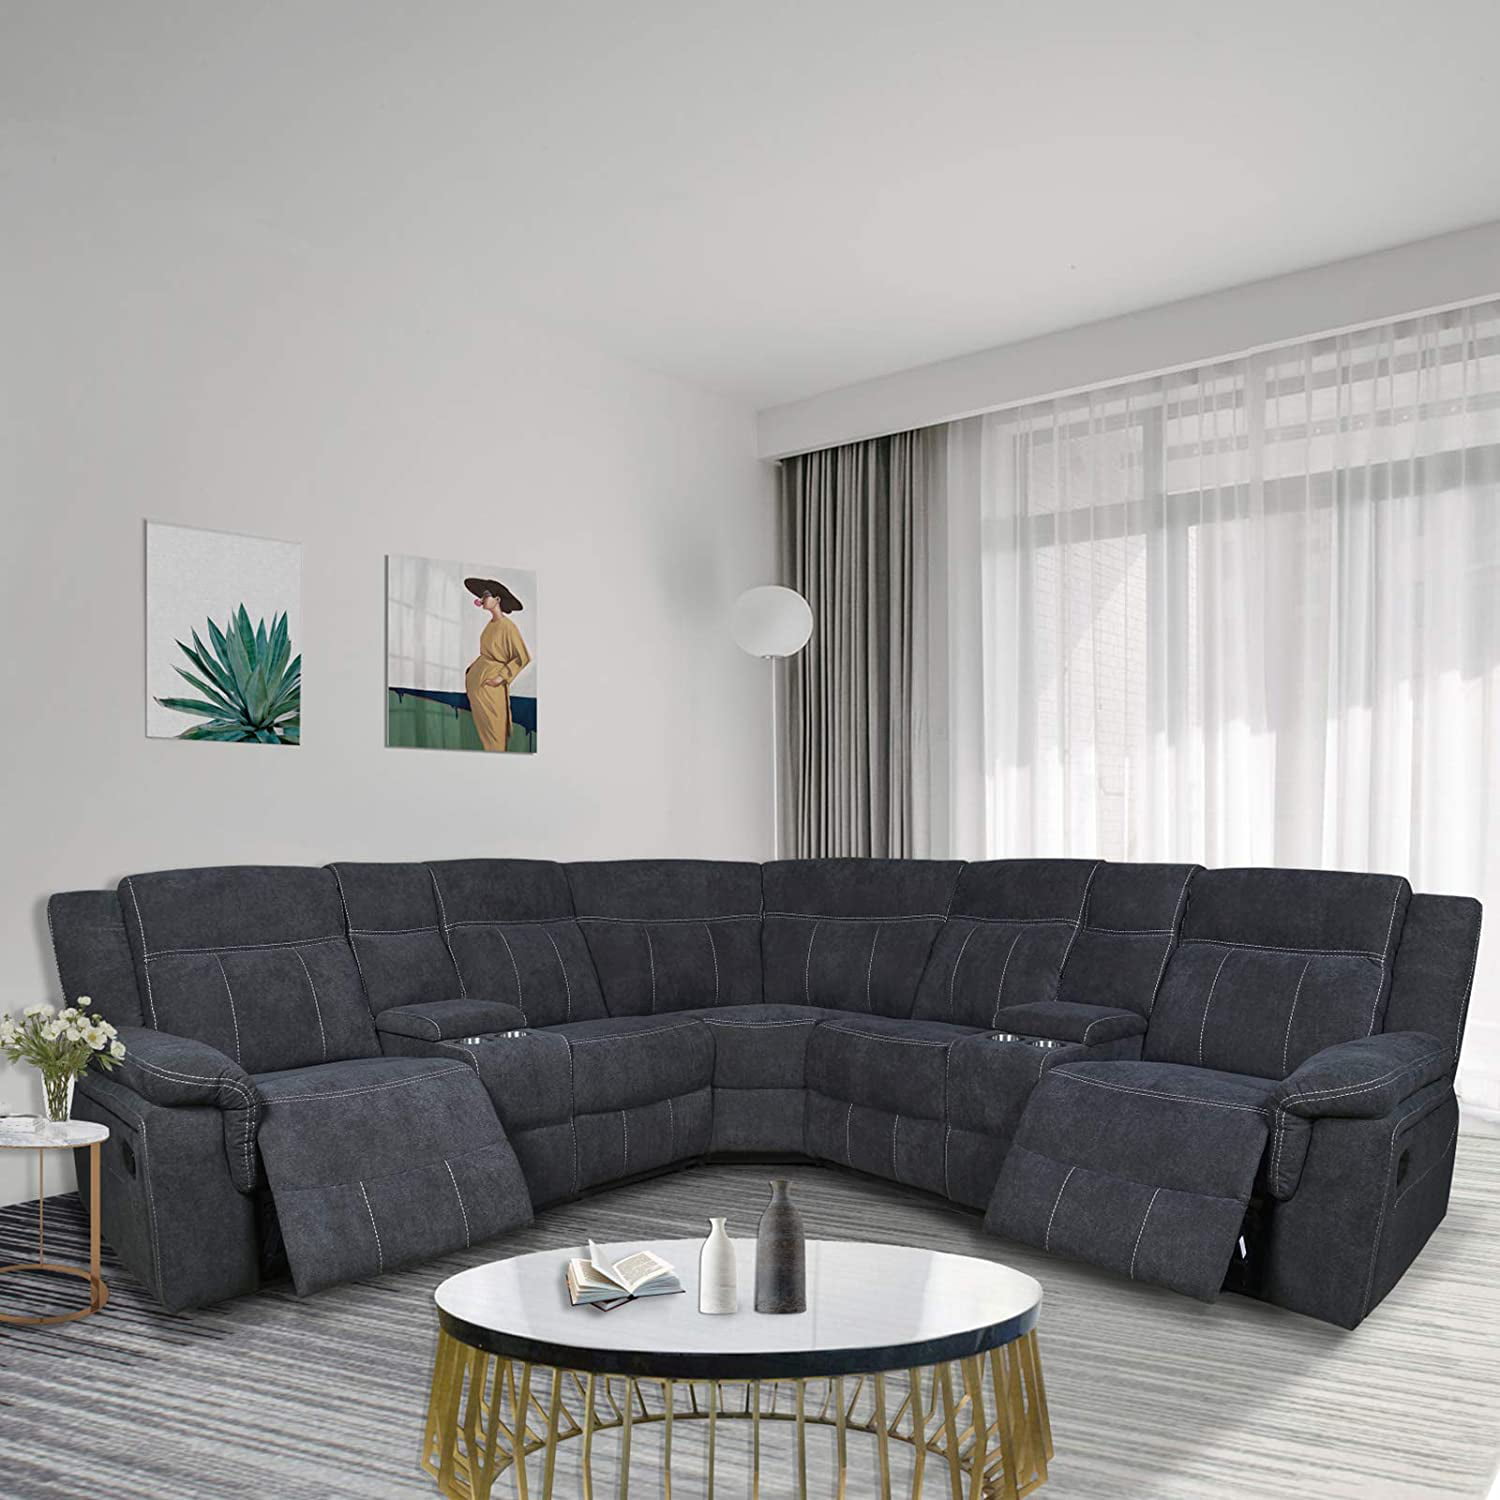 Details about   Modern Sectional Living Room Dark Gray Faux Leather Power Reclining Sofa Set F1U 